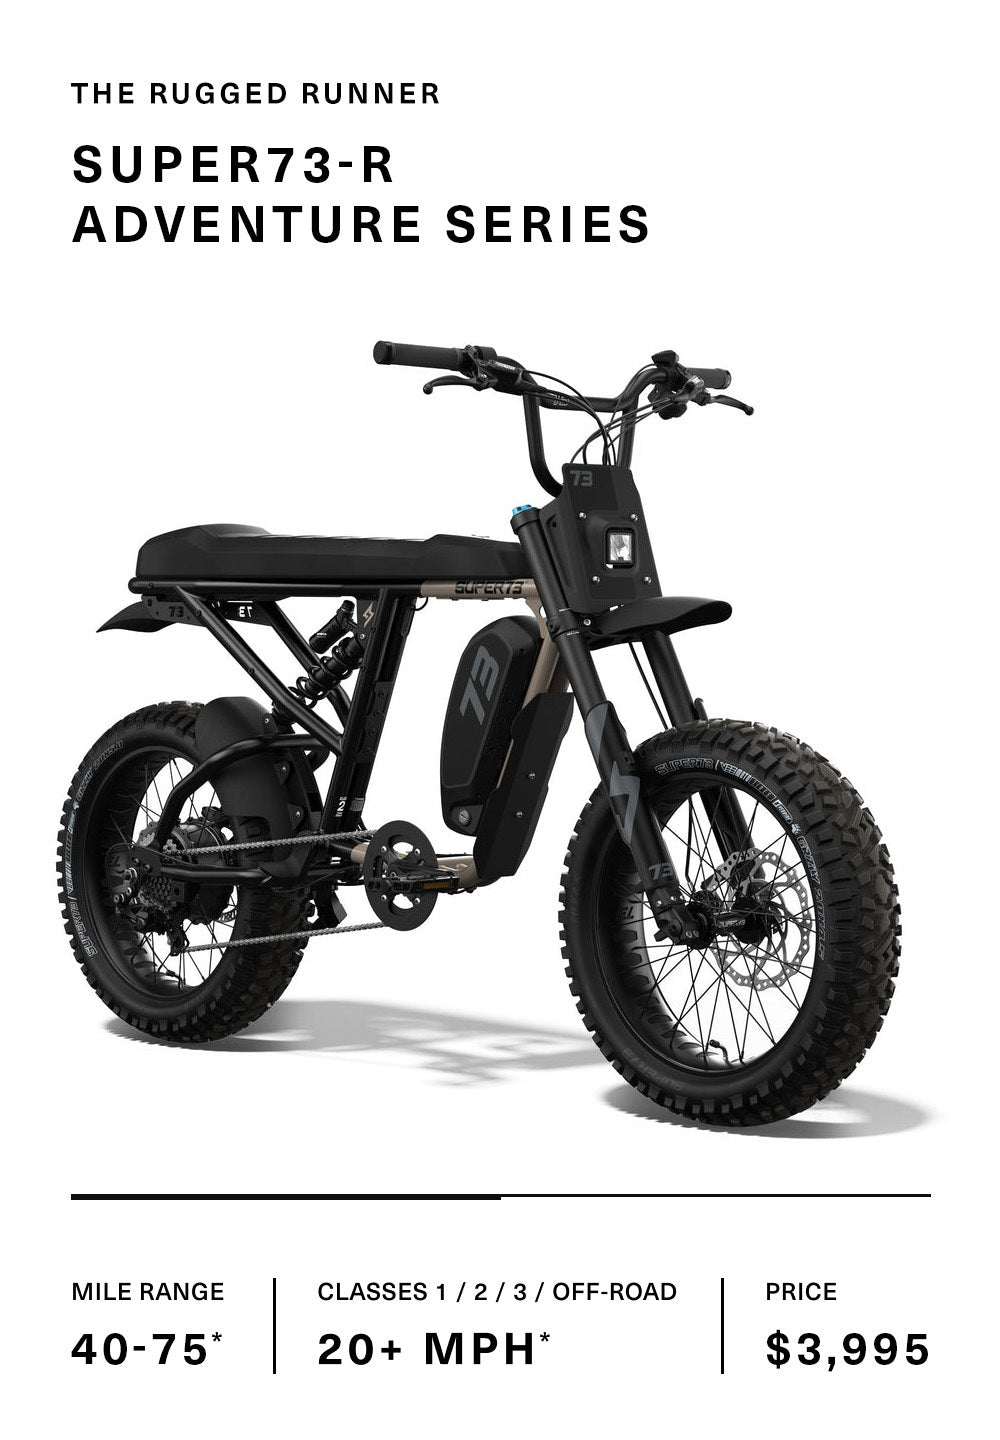 Image of the SUPER73-R Adventure Series bike with specs.